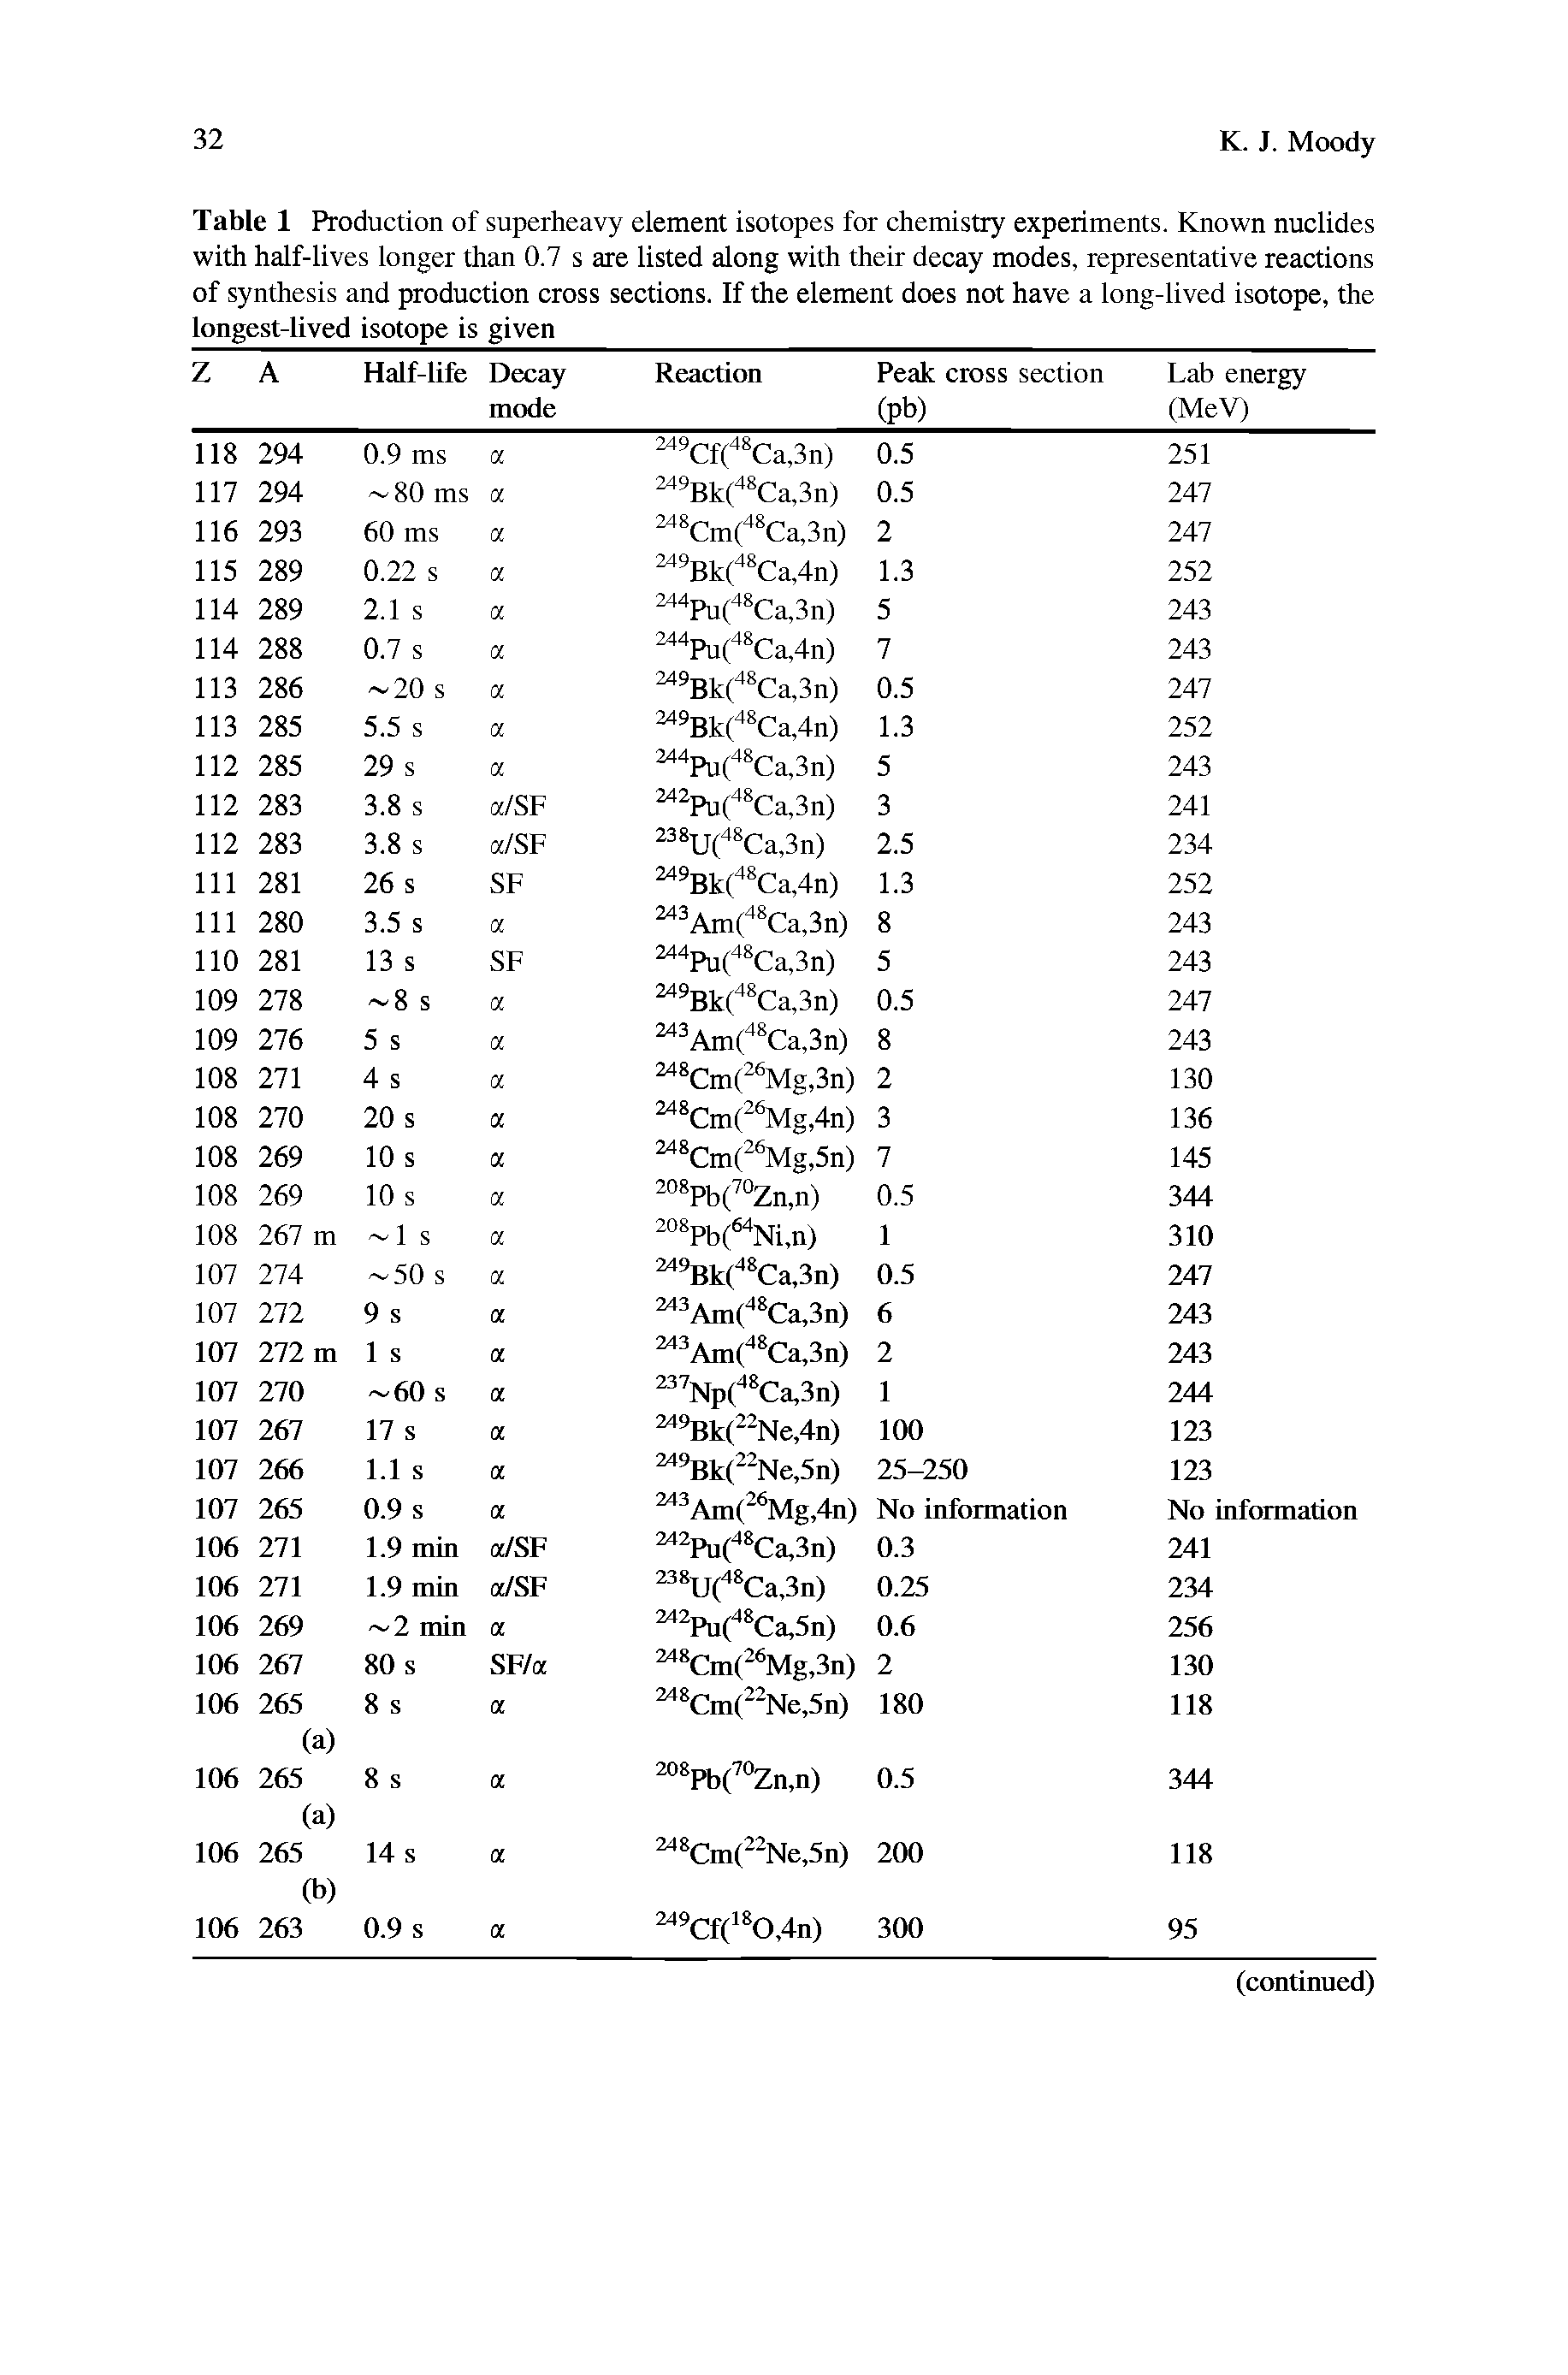 Table 1 Production of superheavy element isotopes for chemistry experiments. Known nuclides with half-lives longer than 0.7 s are listed along with their decay modes, representative reactions of synthesis and production cross sections. If the element does not have a long-lived isotope, the longest-lived isotope is given...